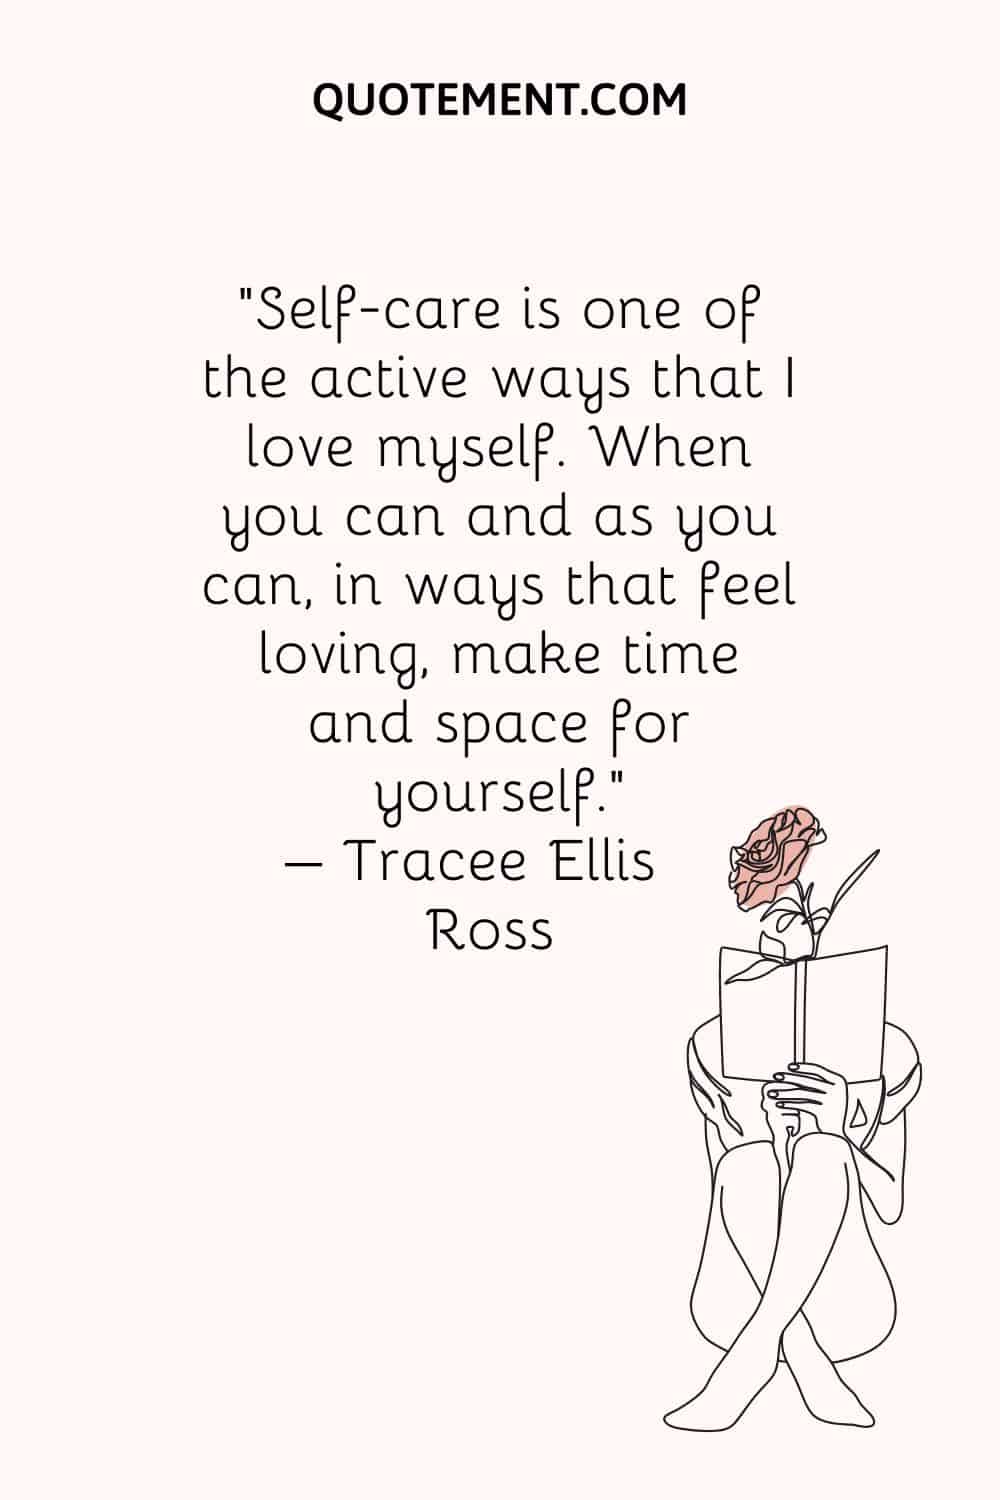 Self-care is one of the active ways that I love myself